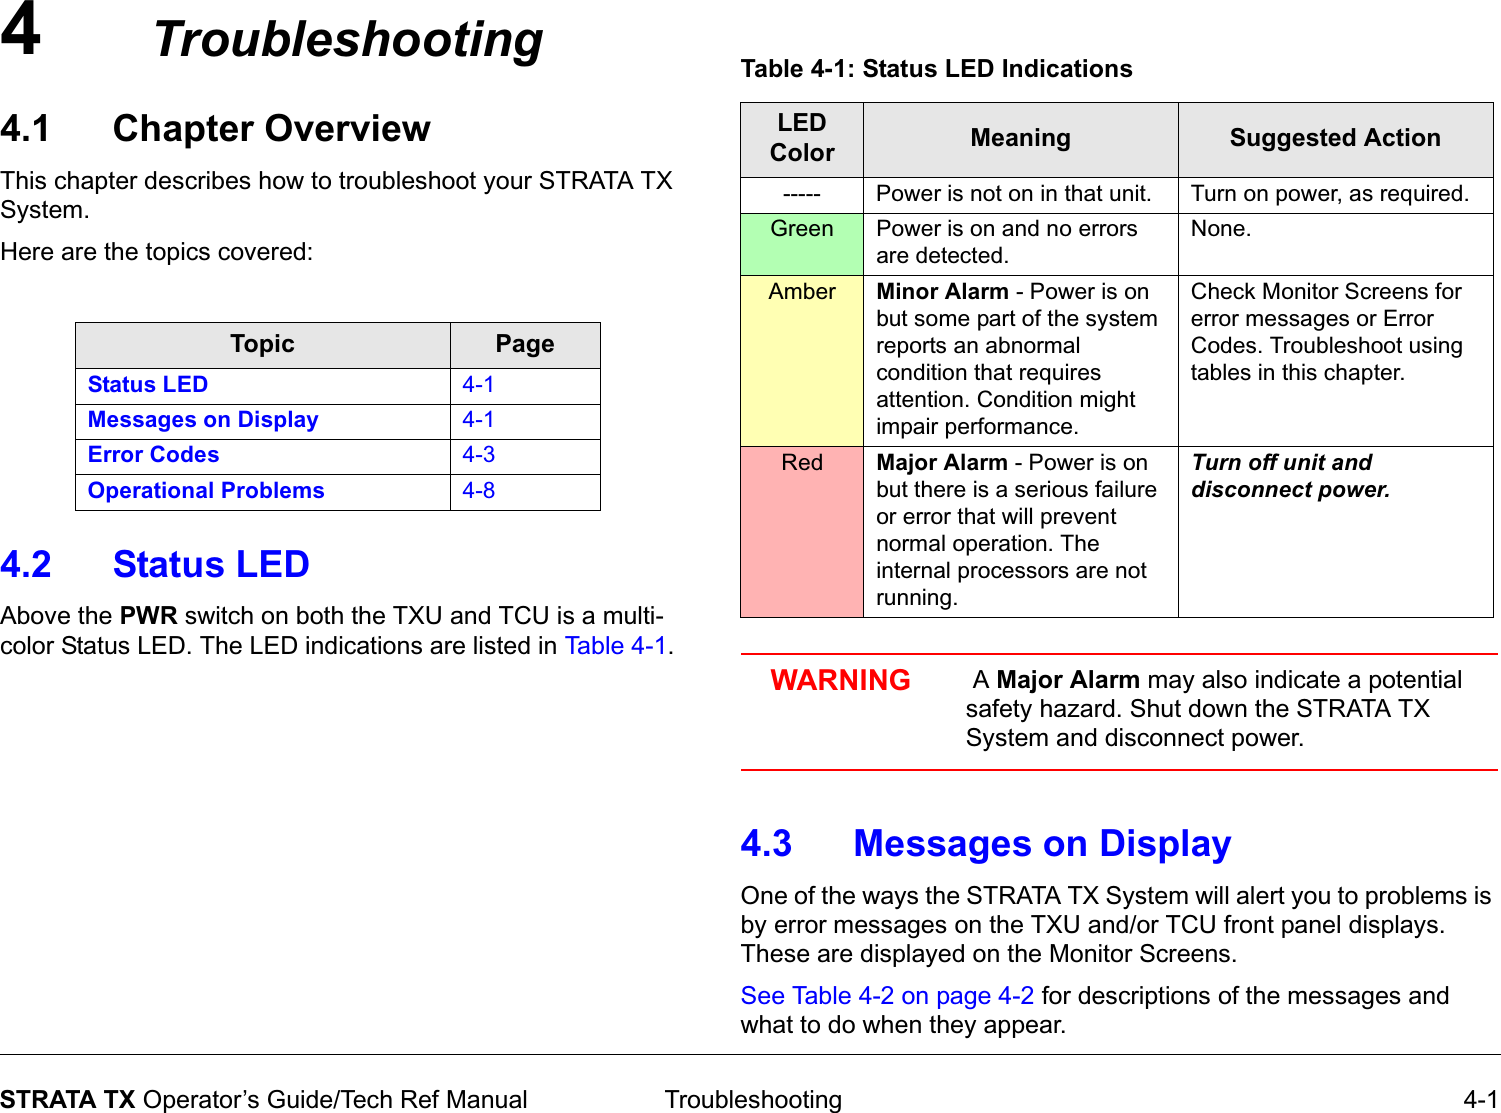 4 Troubleshooting 4-1STRATA TX Operator’s Guide/Tech Ref ManualTroubleshooting4.1 Chapter OverviewThis chapter describes how to troubleshoot your STRATA TX System. Here are the topics covered:4.2 Status LEDAbove the PWR switch on both the TXU and TCU is a multi-color Status LED. The LED indications are listed in Table 4-1. Topic PageStatus LED 4-1Messages on Display 4-1Error Codes 4-3Operational Problems 4-8  WARNING  A Major Alarm may also indicate a potential safety hazard. Shut down the STRATA TX System and disconnect power.4.3 Messages on DisplayOne of the ways the STRATA TX System will alert you to problems is by error messages on the TXU and/or TCU front panel displays. These are displayed on the Monitor Screens. See Table 4-2 on page 4-2 for descriptions of the messages and what to do when they appear.Table 4-1: Status LED IndicationsLED Color Meaning Suggested Action----- Power is not on in that unit. Turn on power, as required.Green Power is on and no errors are detected.None.Amber Minor Alarm - Power is on but some part of the system reports an abnormal condition that requires attention. Condition might impair performance. Check Monitor Screens for error messages or Error Codes. Troubleshoot using tables in this chapter.Red Major Alarm - Power is on but there is a serious failure or error that will prevent normal operation. The internal processors are not running.Turn off unit and disconnect power. 